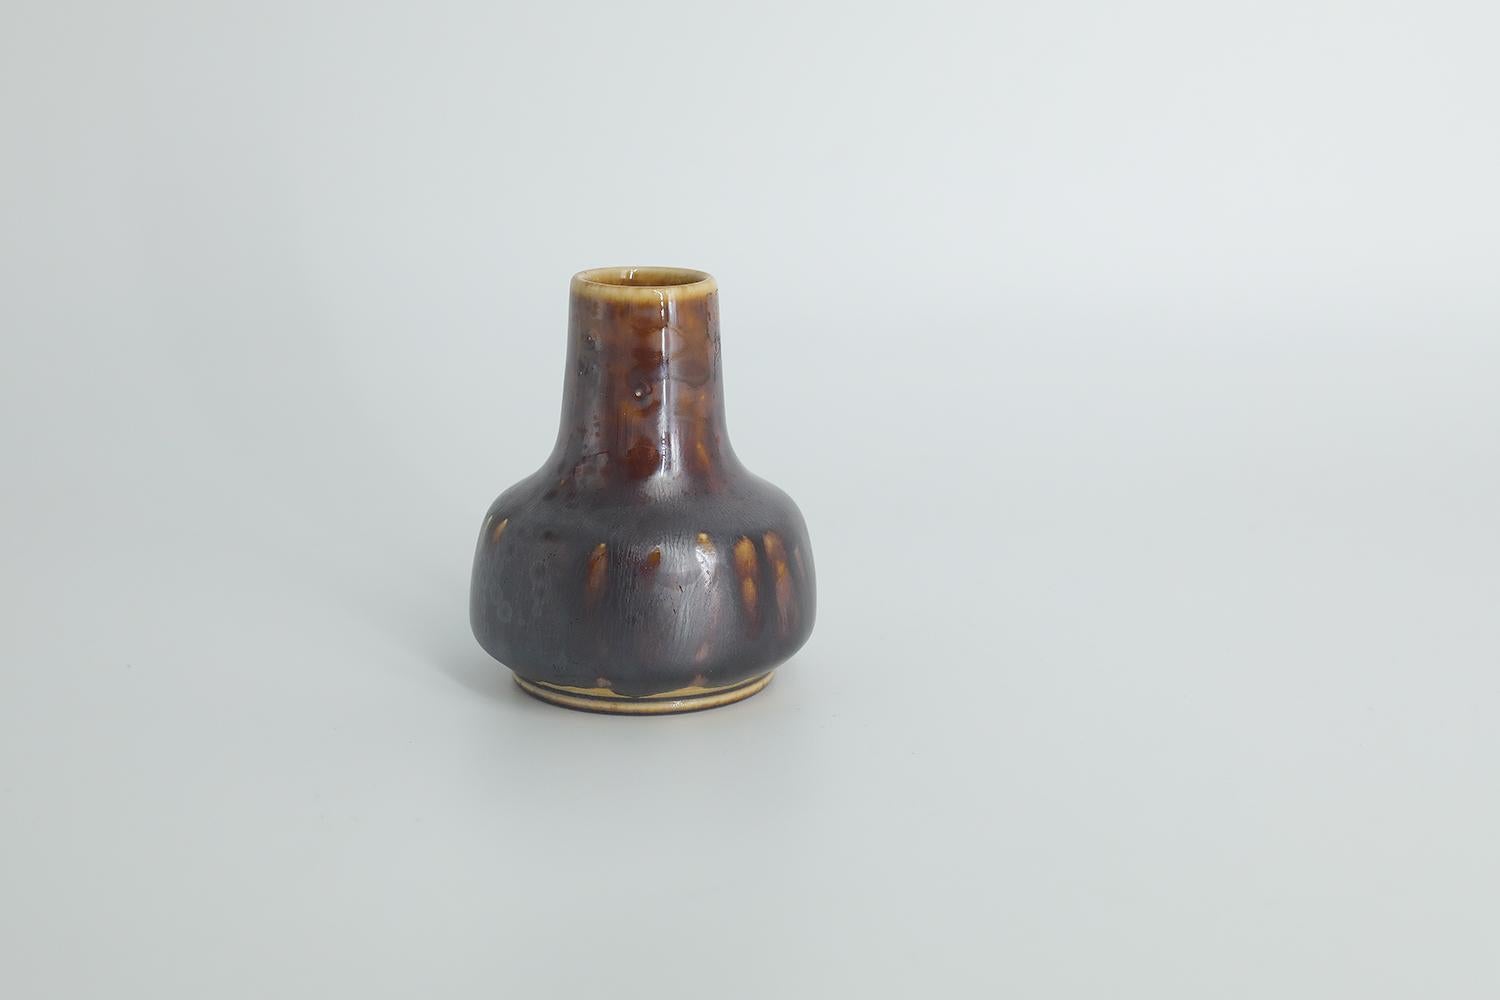 This miniature, collectible stoneware vase was designed by Gunnar Borg for the Swedish manufacture Höganäs Keramik during the 1960s. Handmade by a Master, with the utmost care and attention to details. This vase dyed brown in an irregular shade.